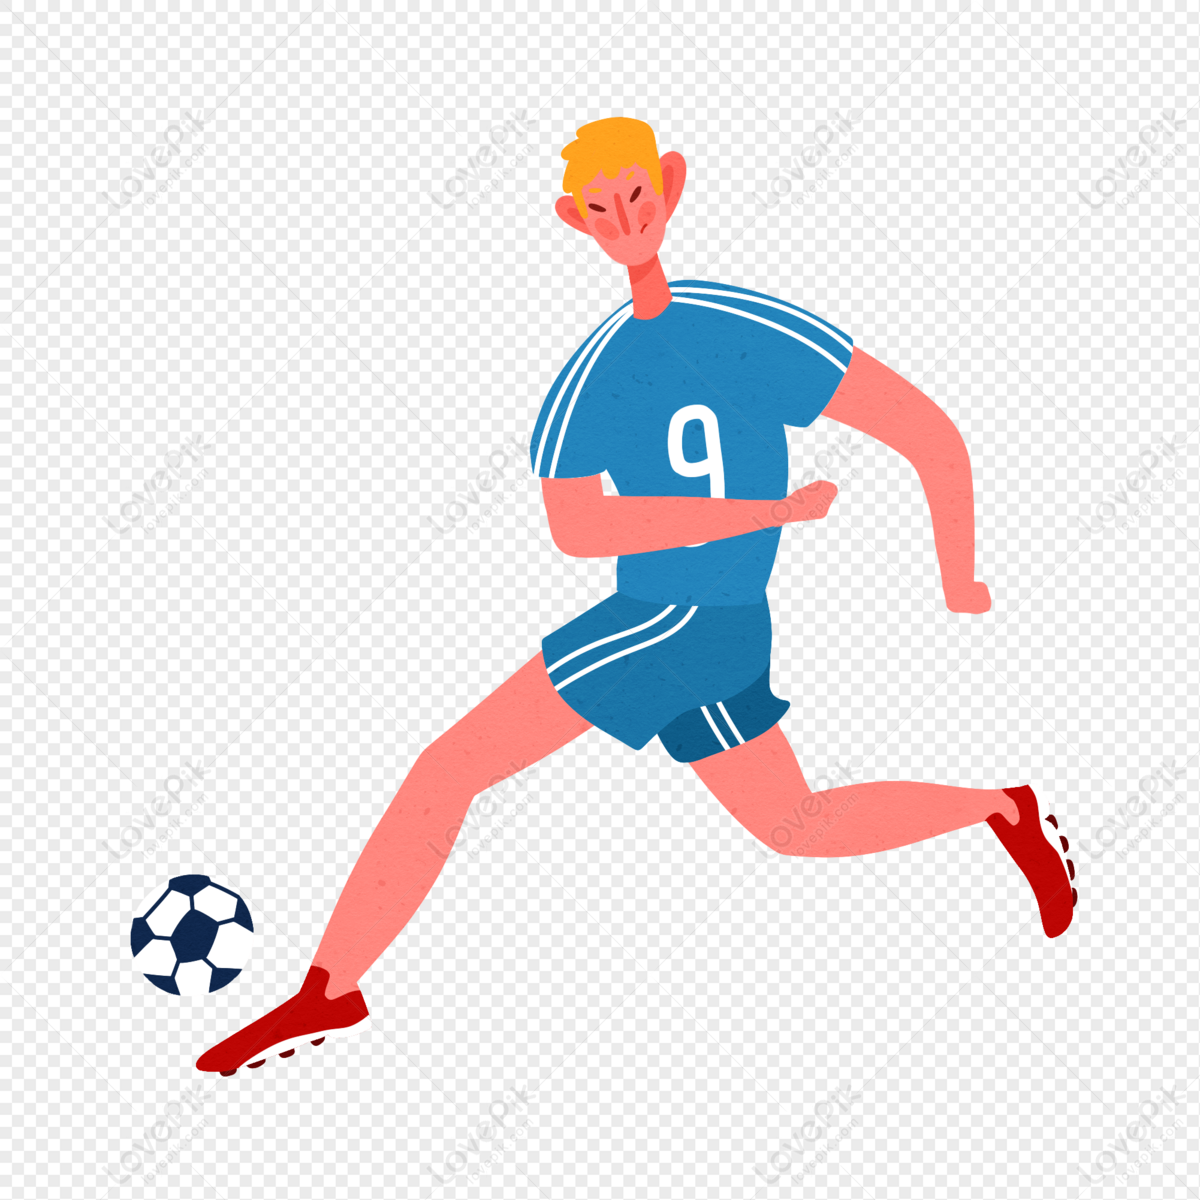 Play Football PNG Transparent Image And Clipart Image For Free Download ...